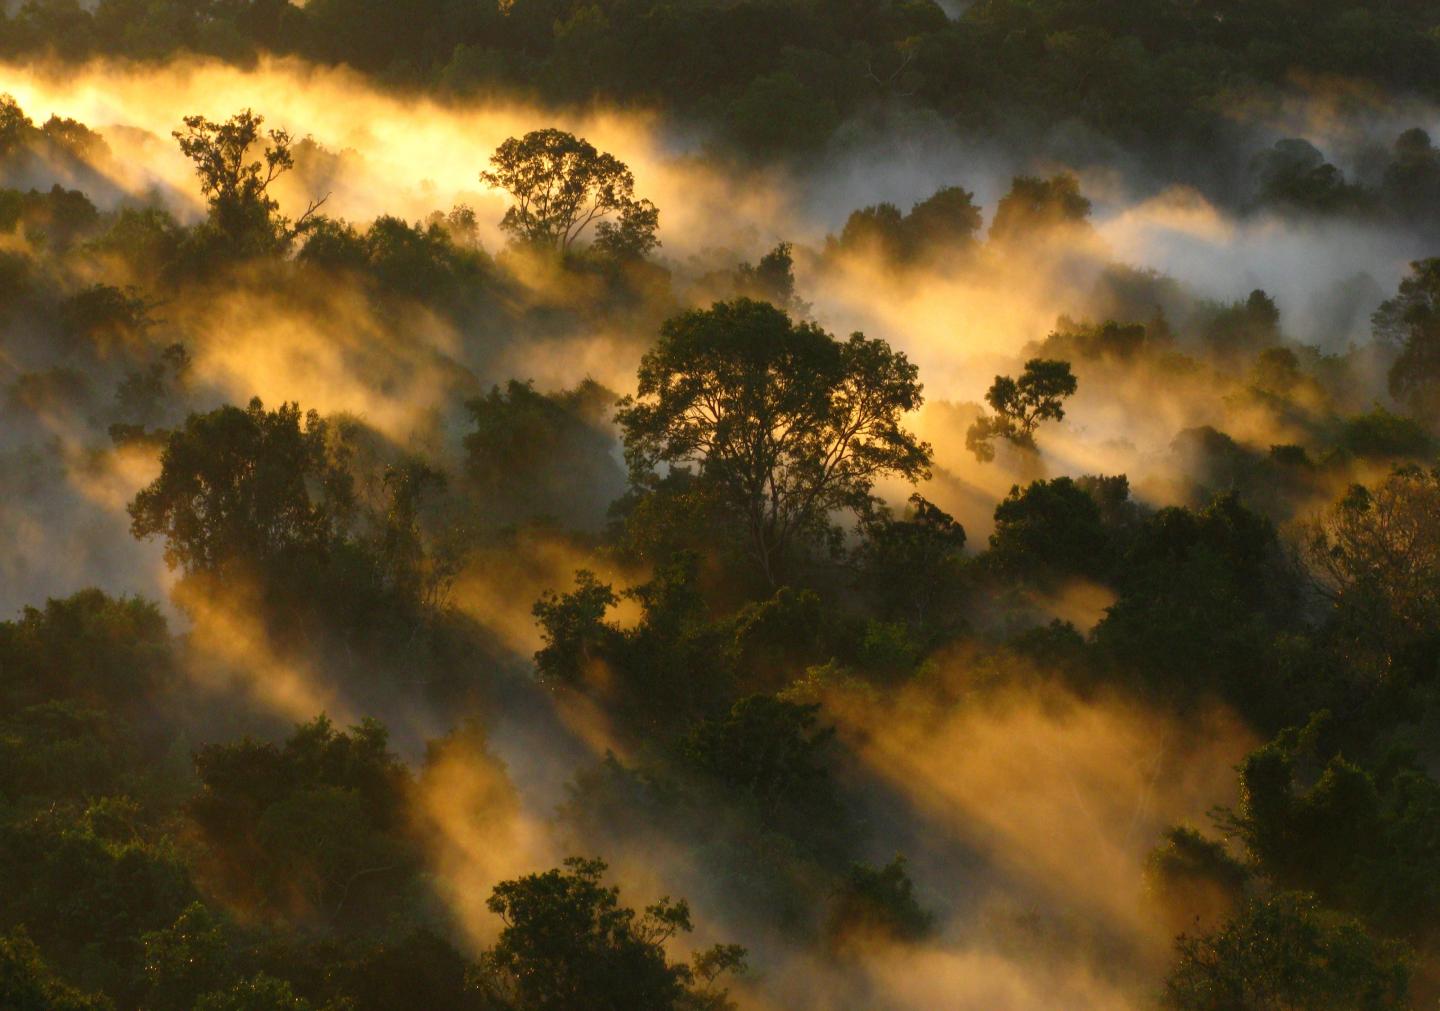 Amazon Forest canopy at dawn in Brazil